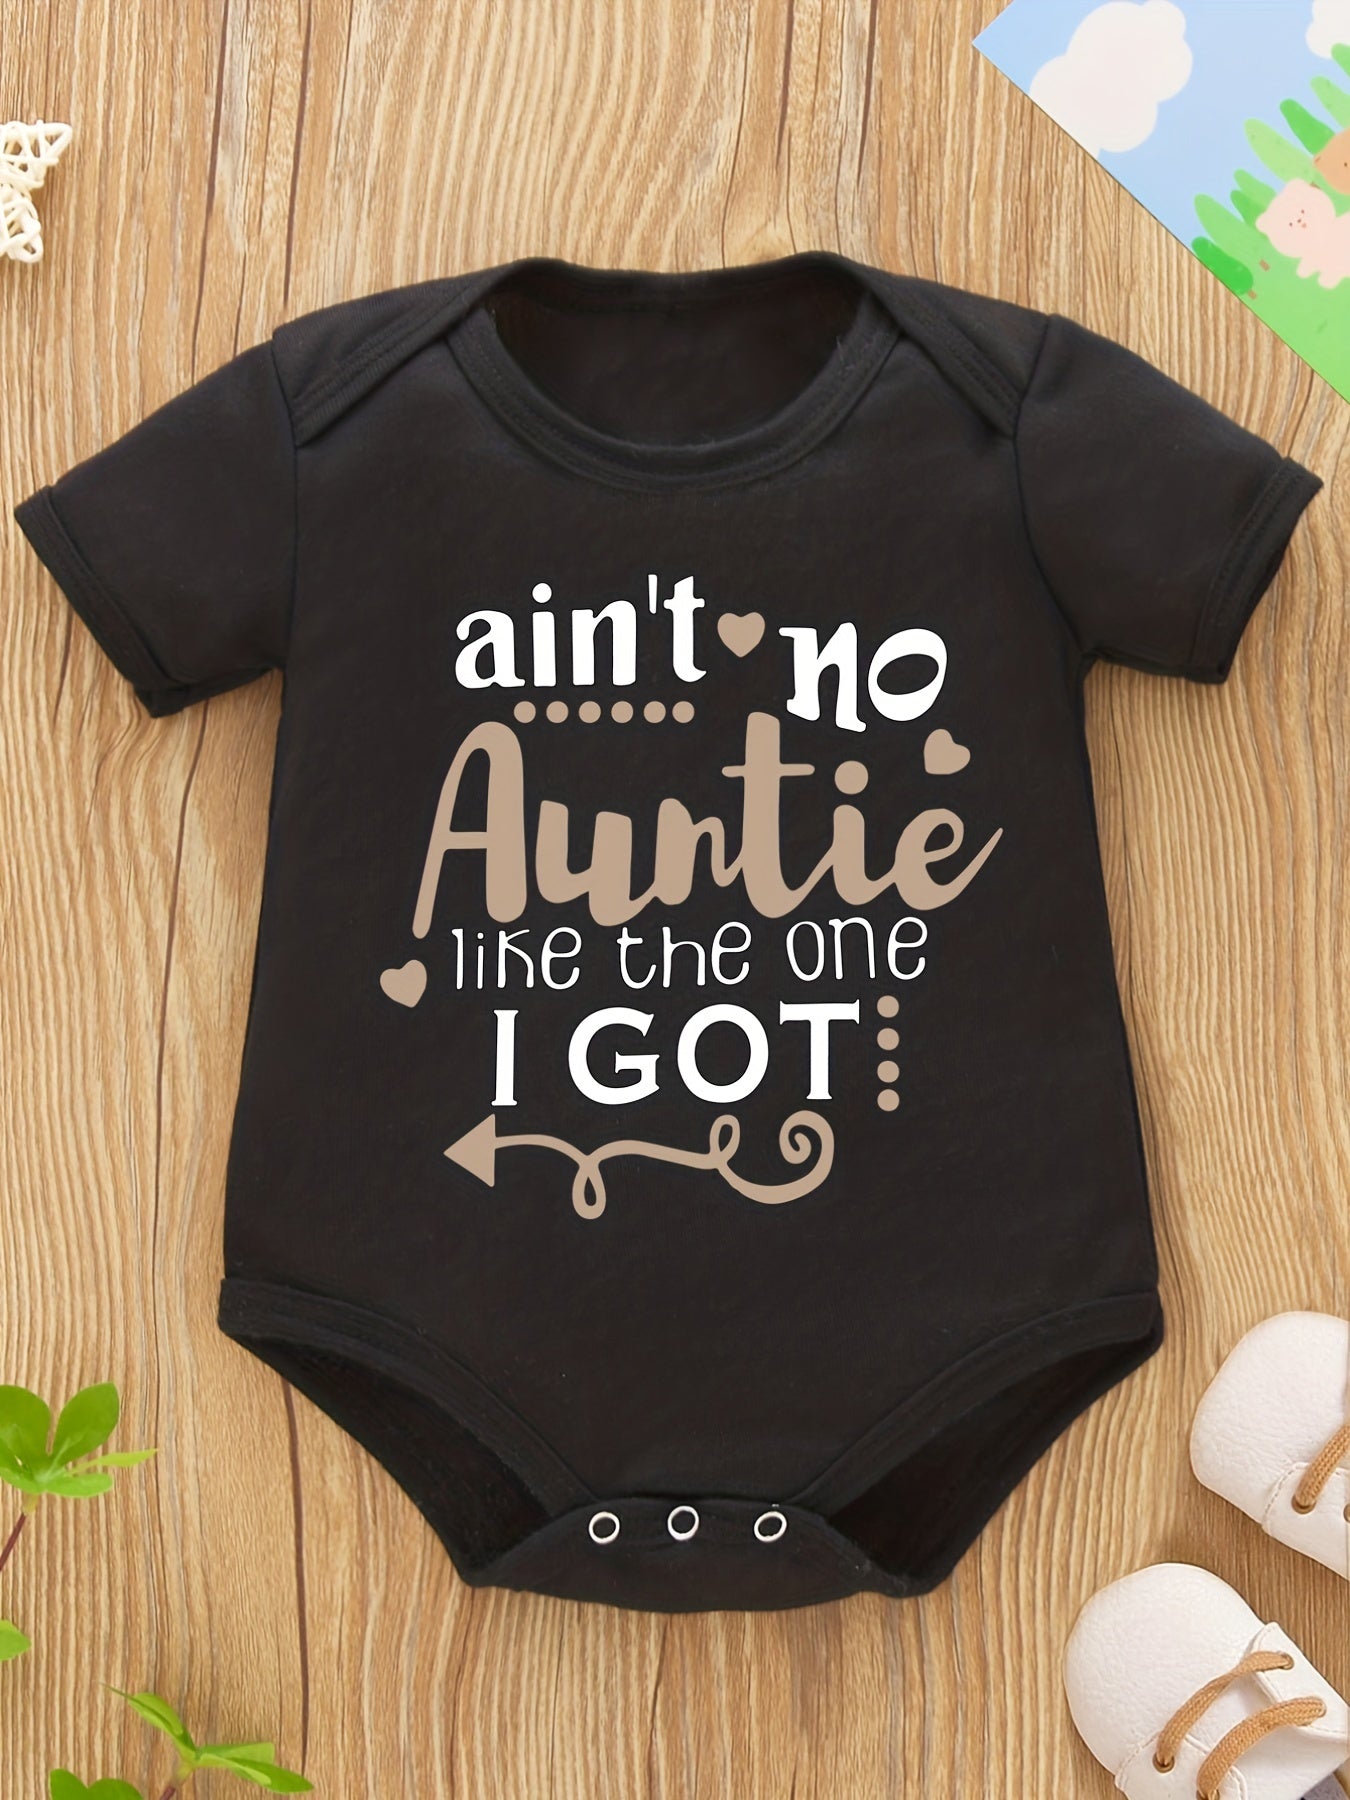 Adorable Baby Romper - Humorous Letter Print Short Sleeve Onesie - Perfect Summer Outfit for Newborns & Toddlers